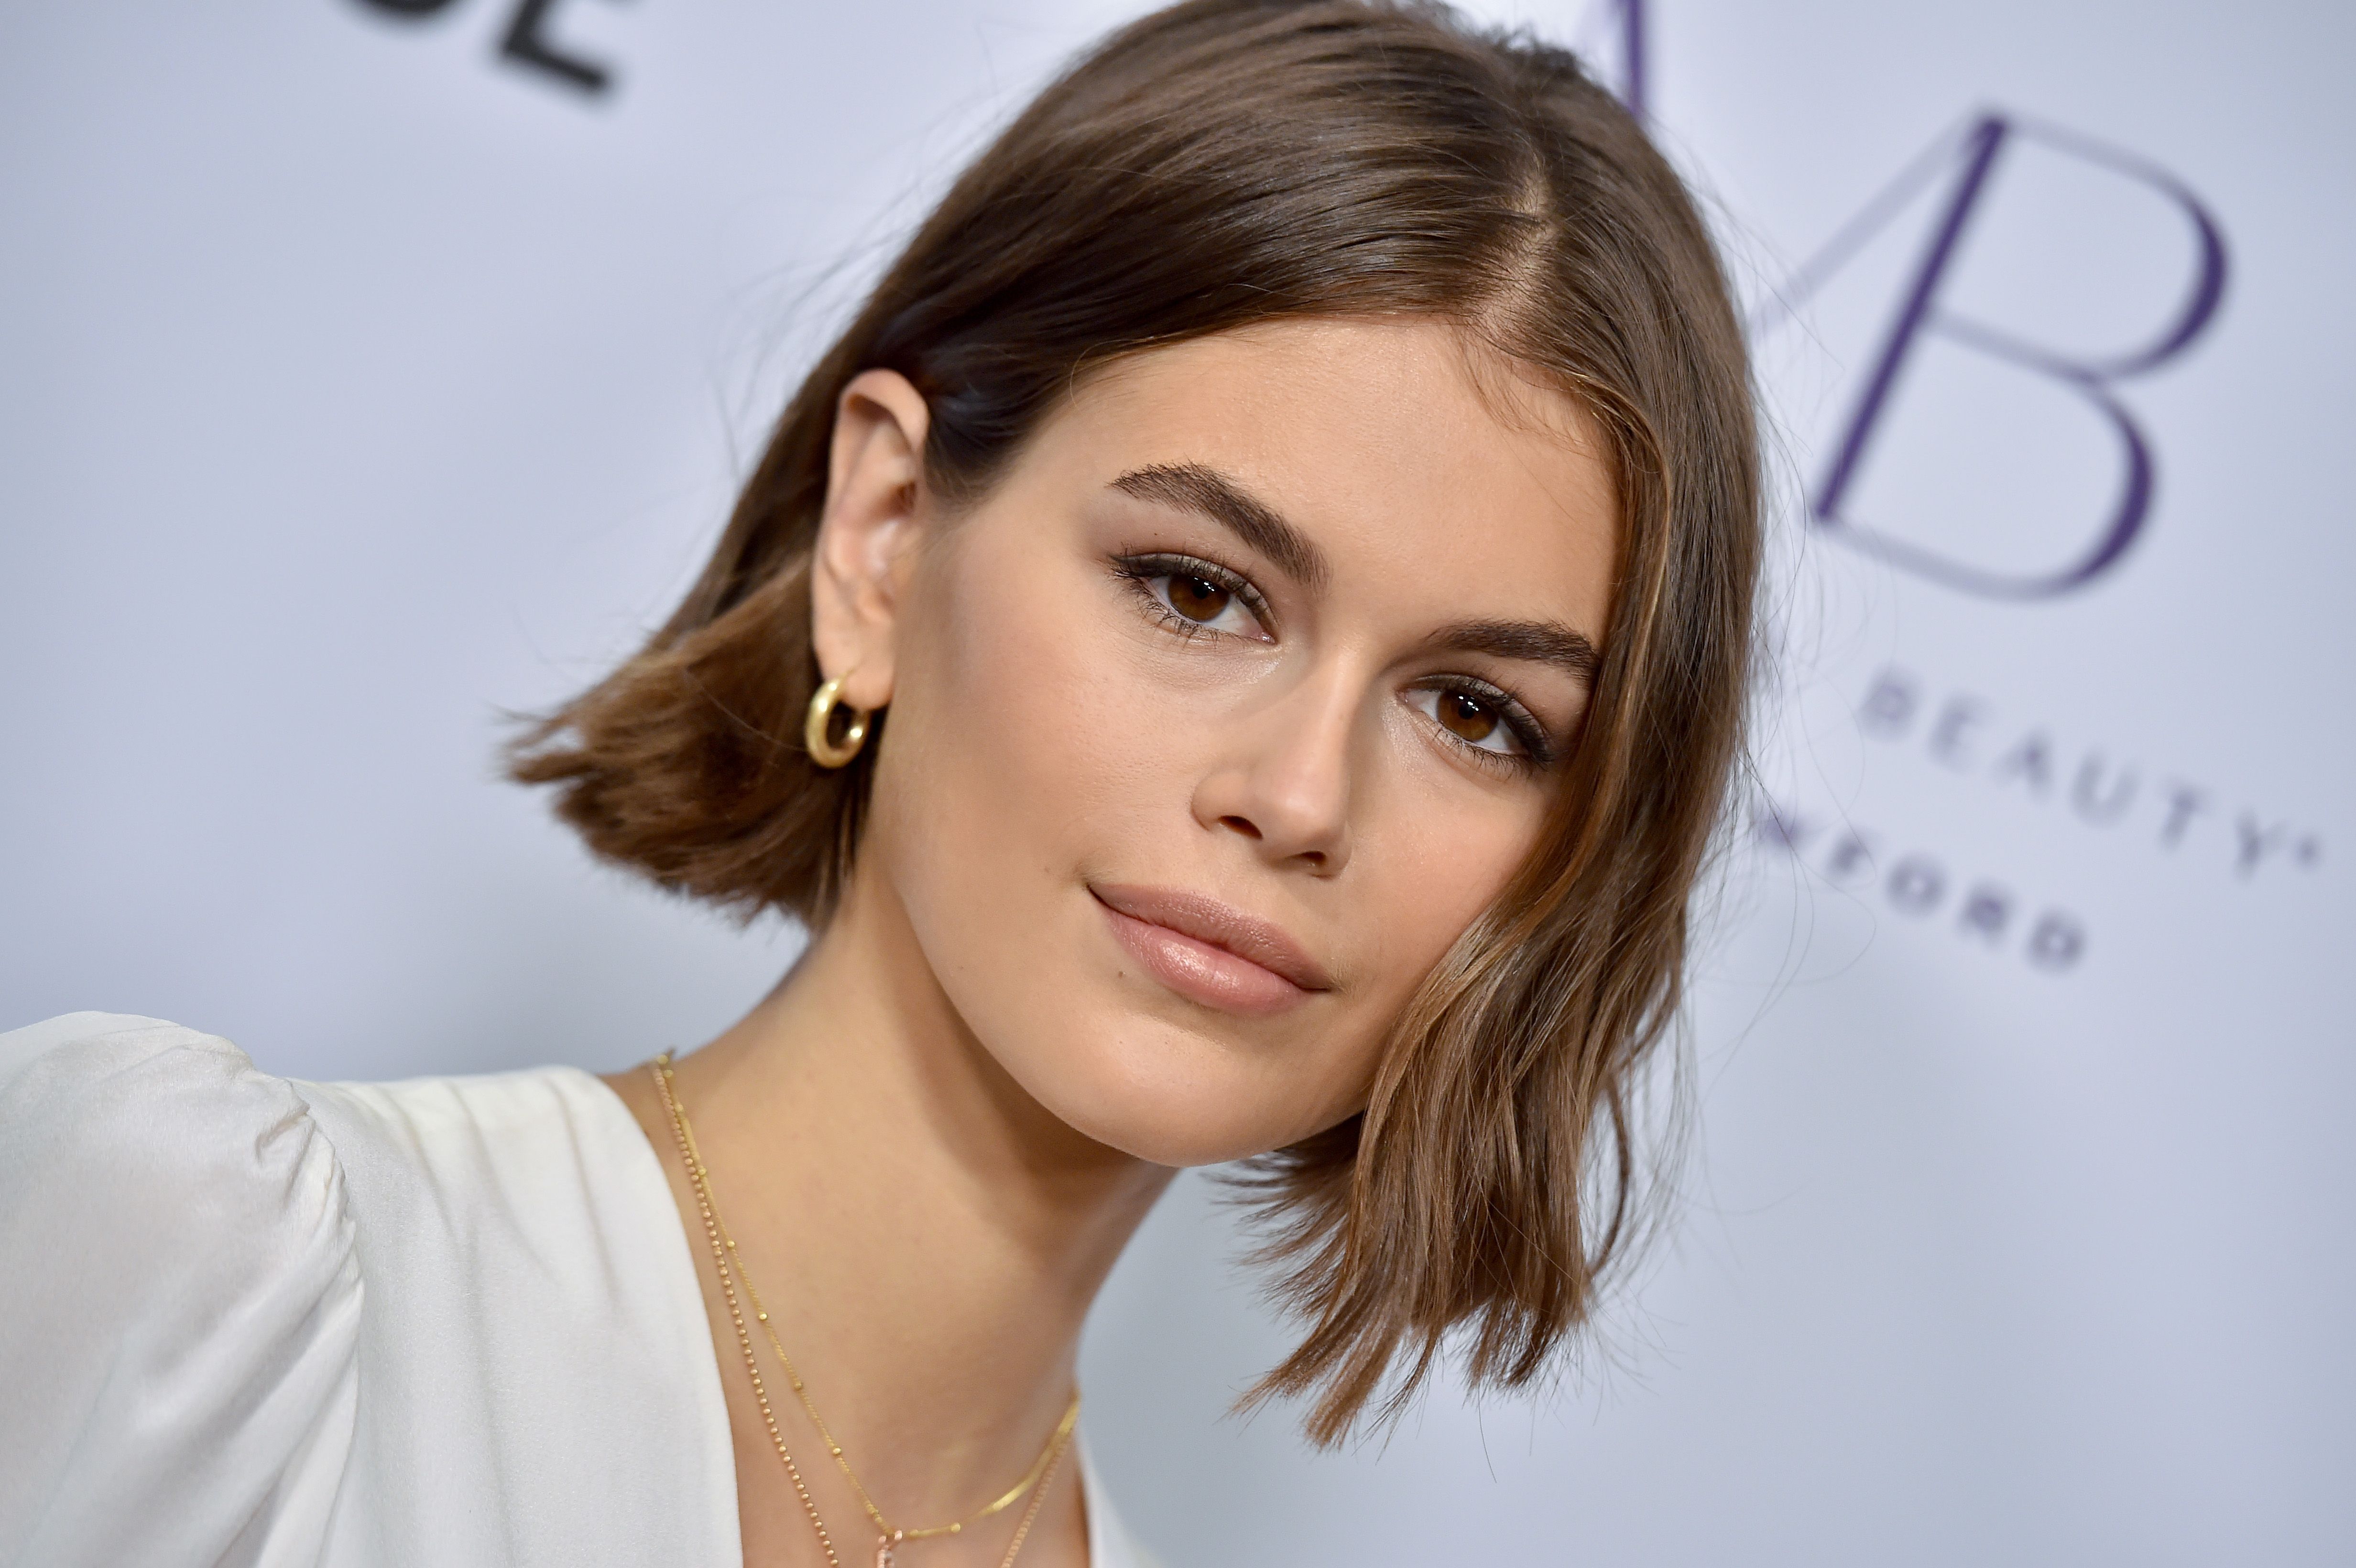 50 Hairstyles To Try in 2020 - Popular New Hair Looks